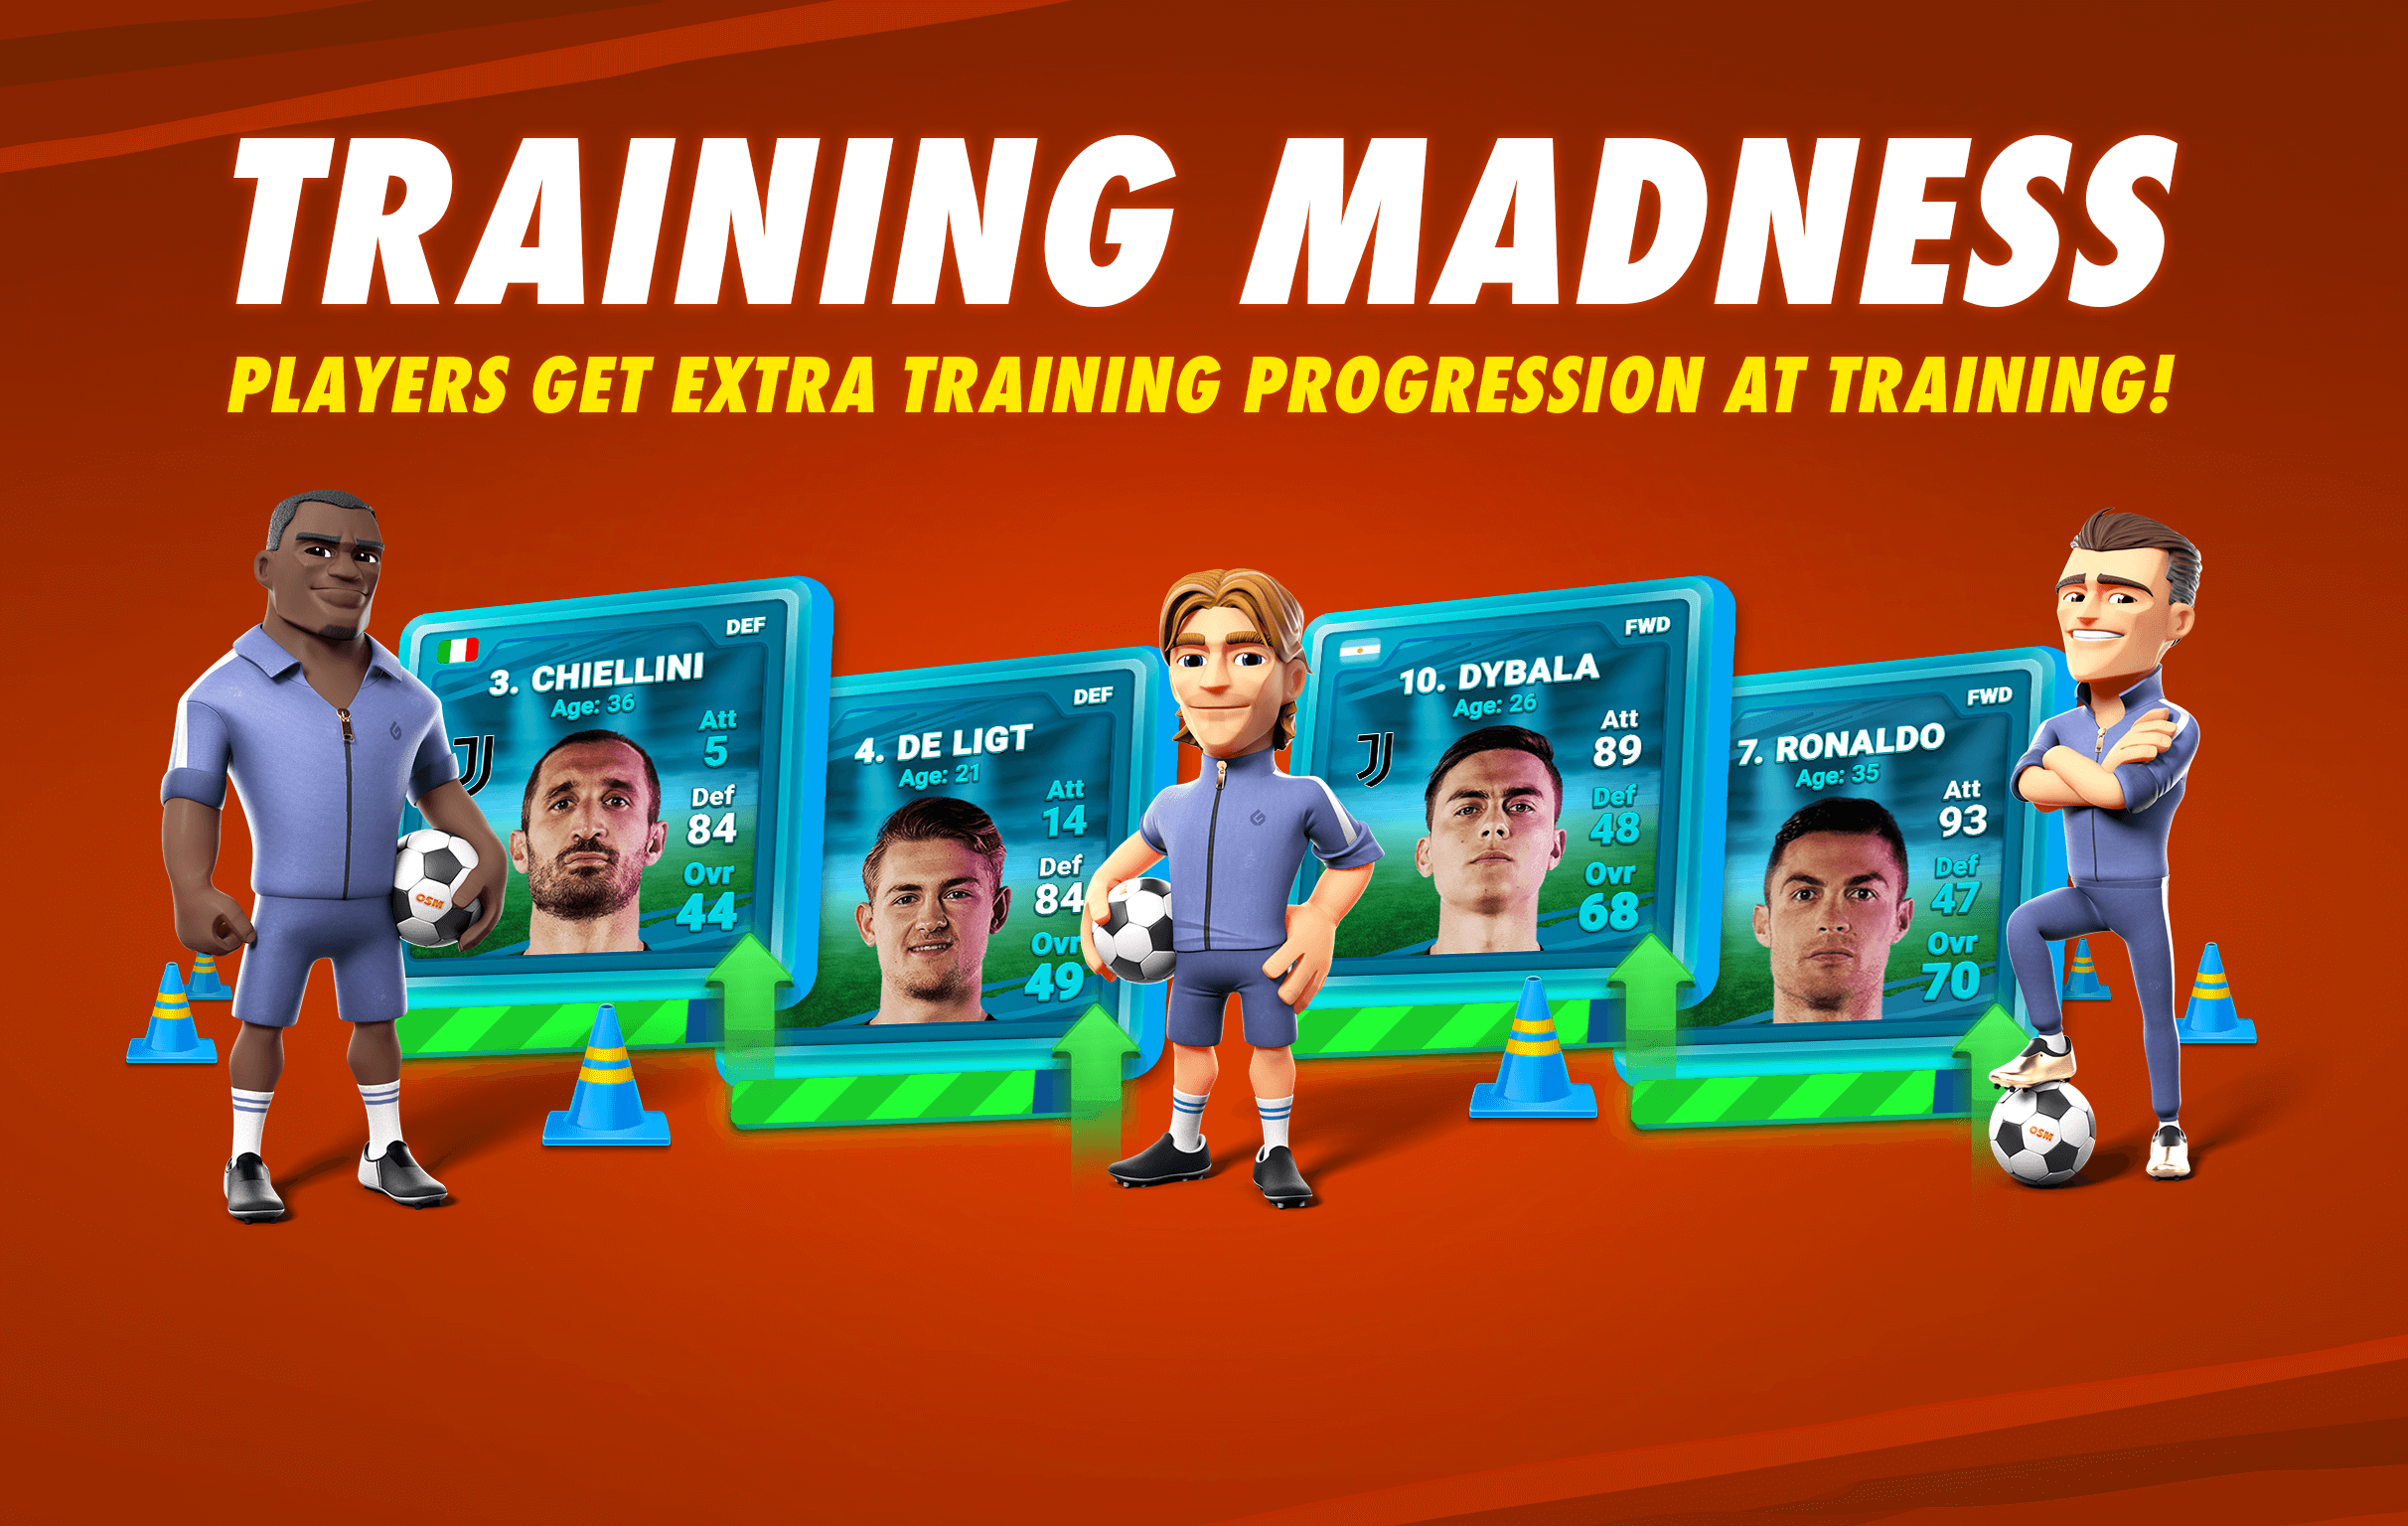 CP_Training Madness_EN.png